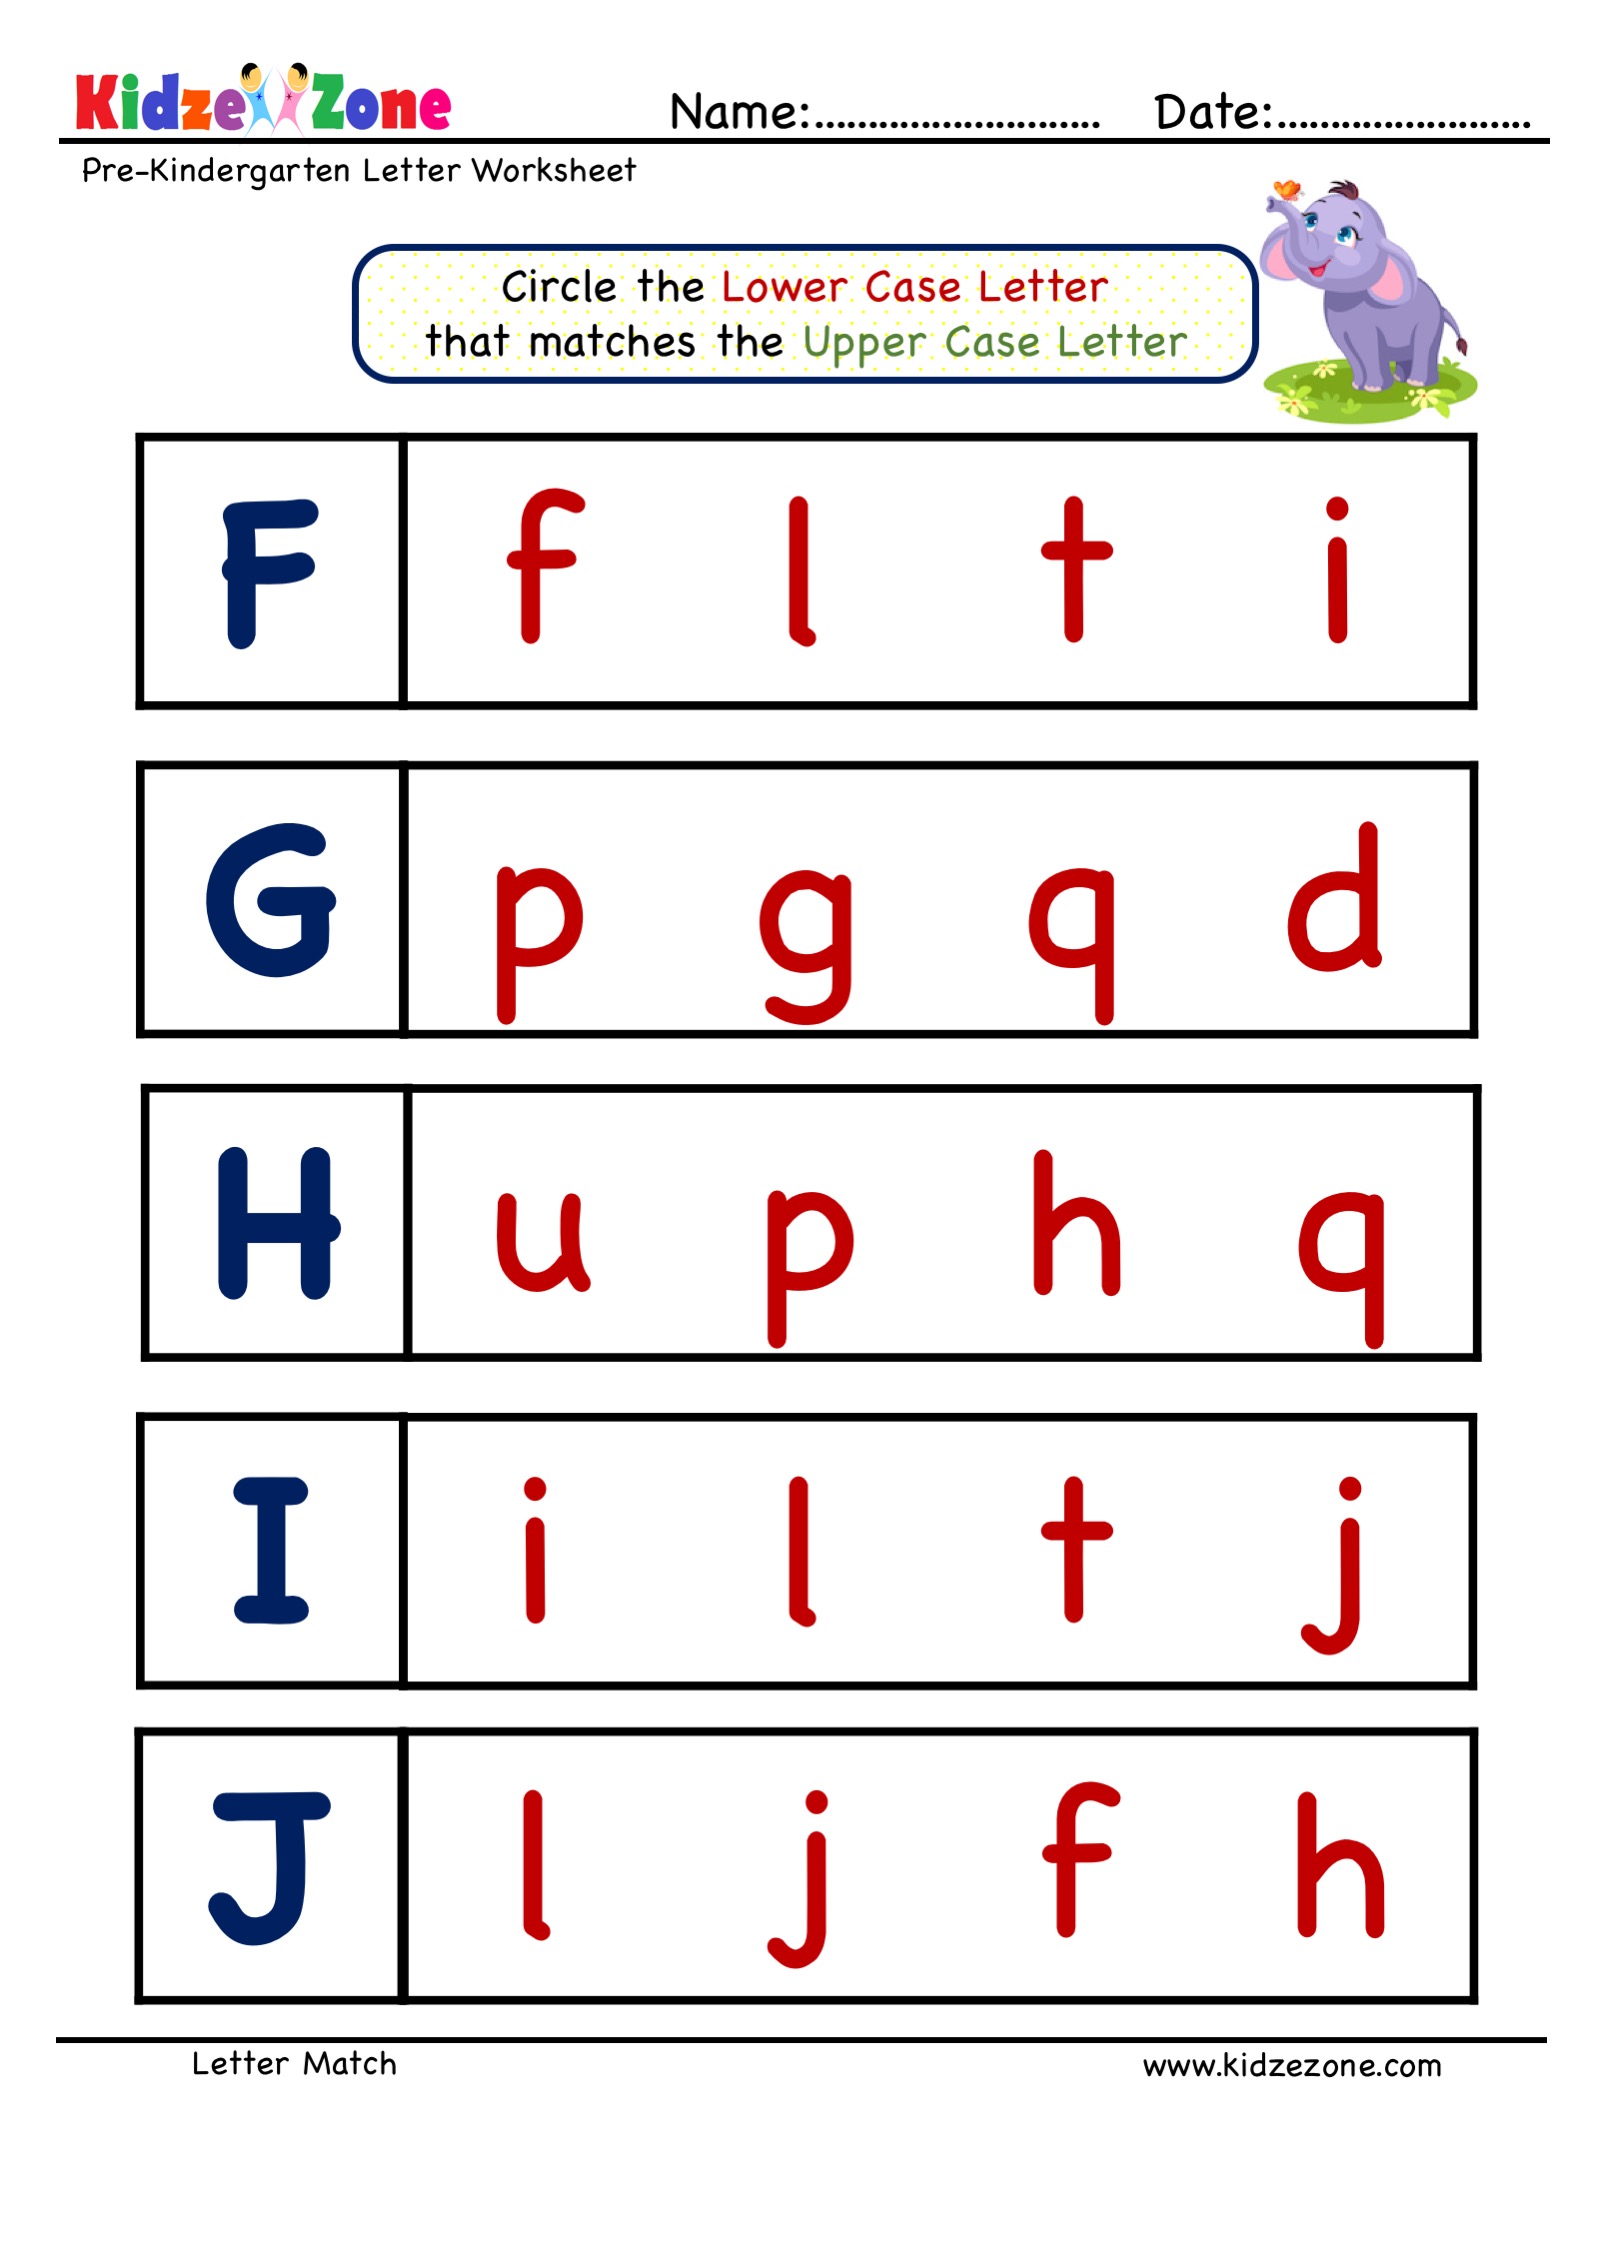 prek-letter-matching-worksheet-match-uppercase-to-lowercase-workbook-for-letters-f-to-j